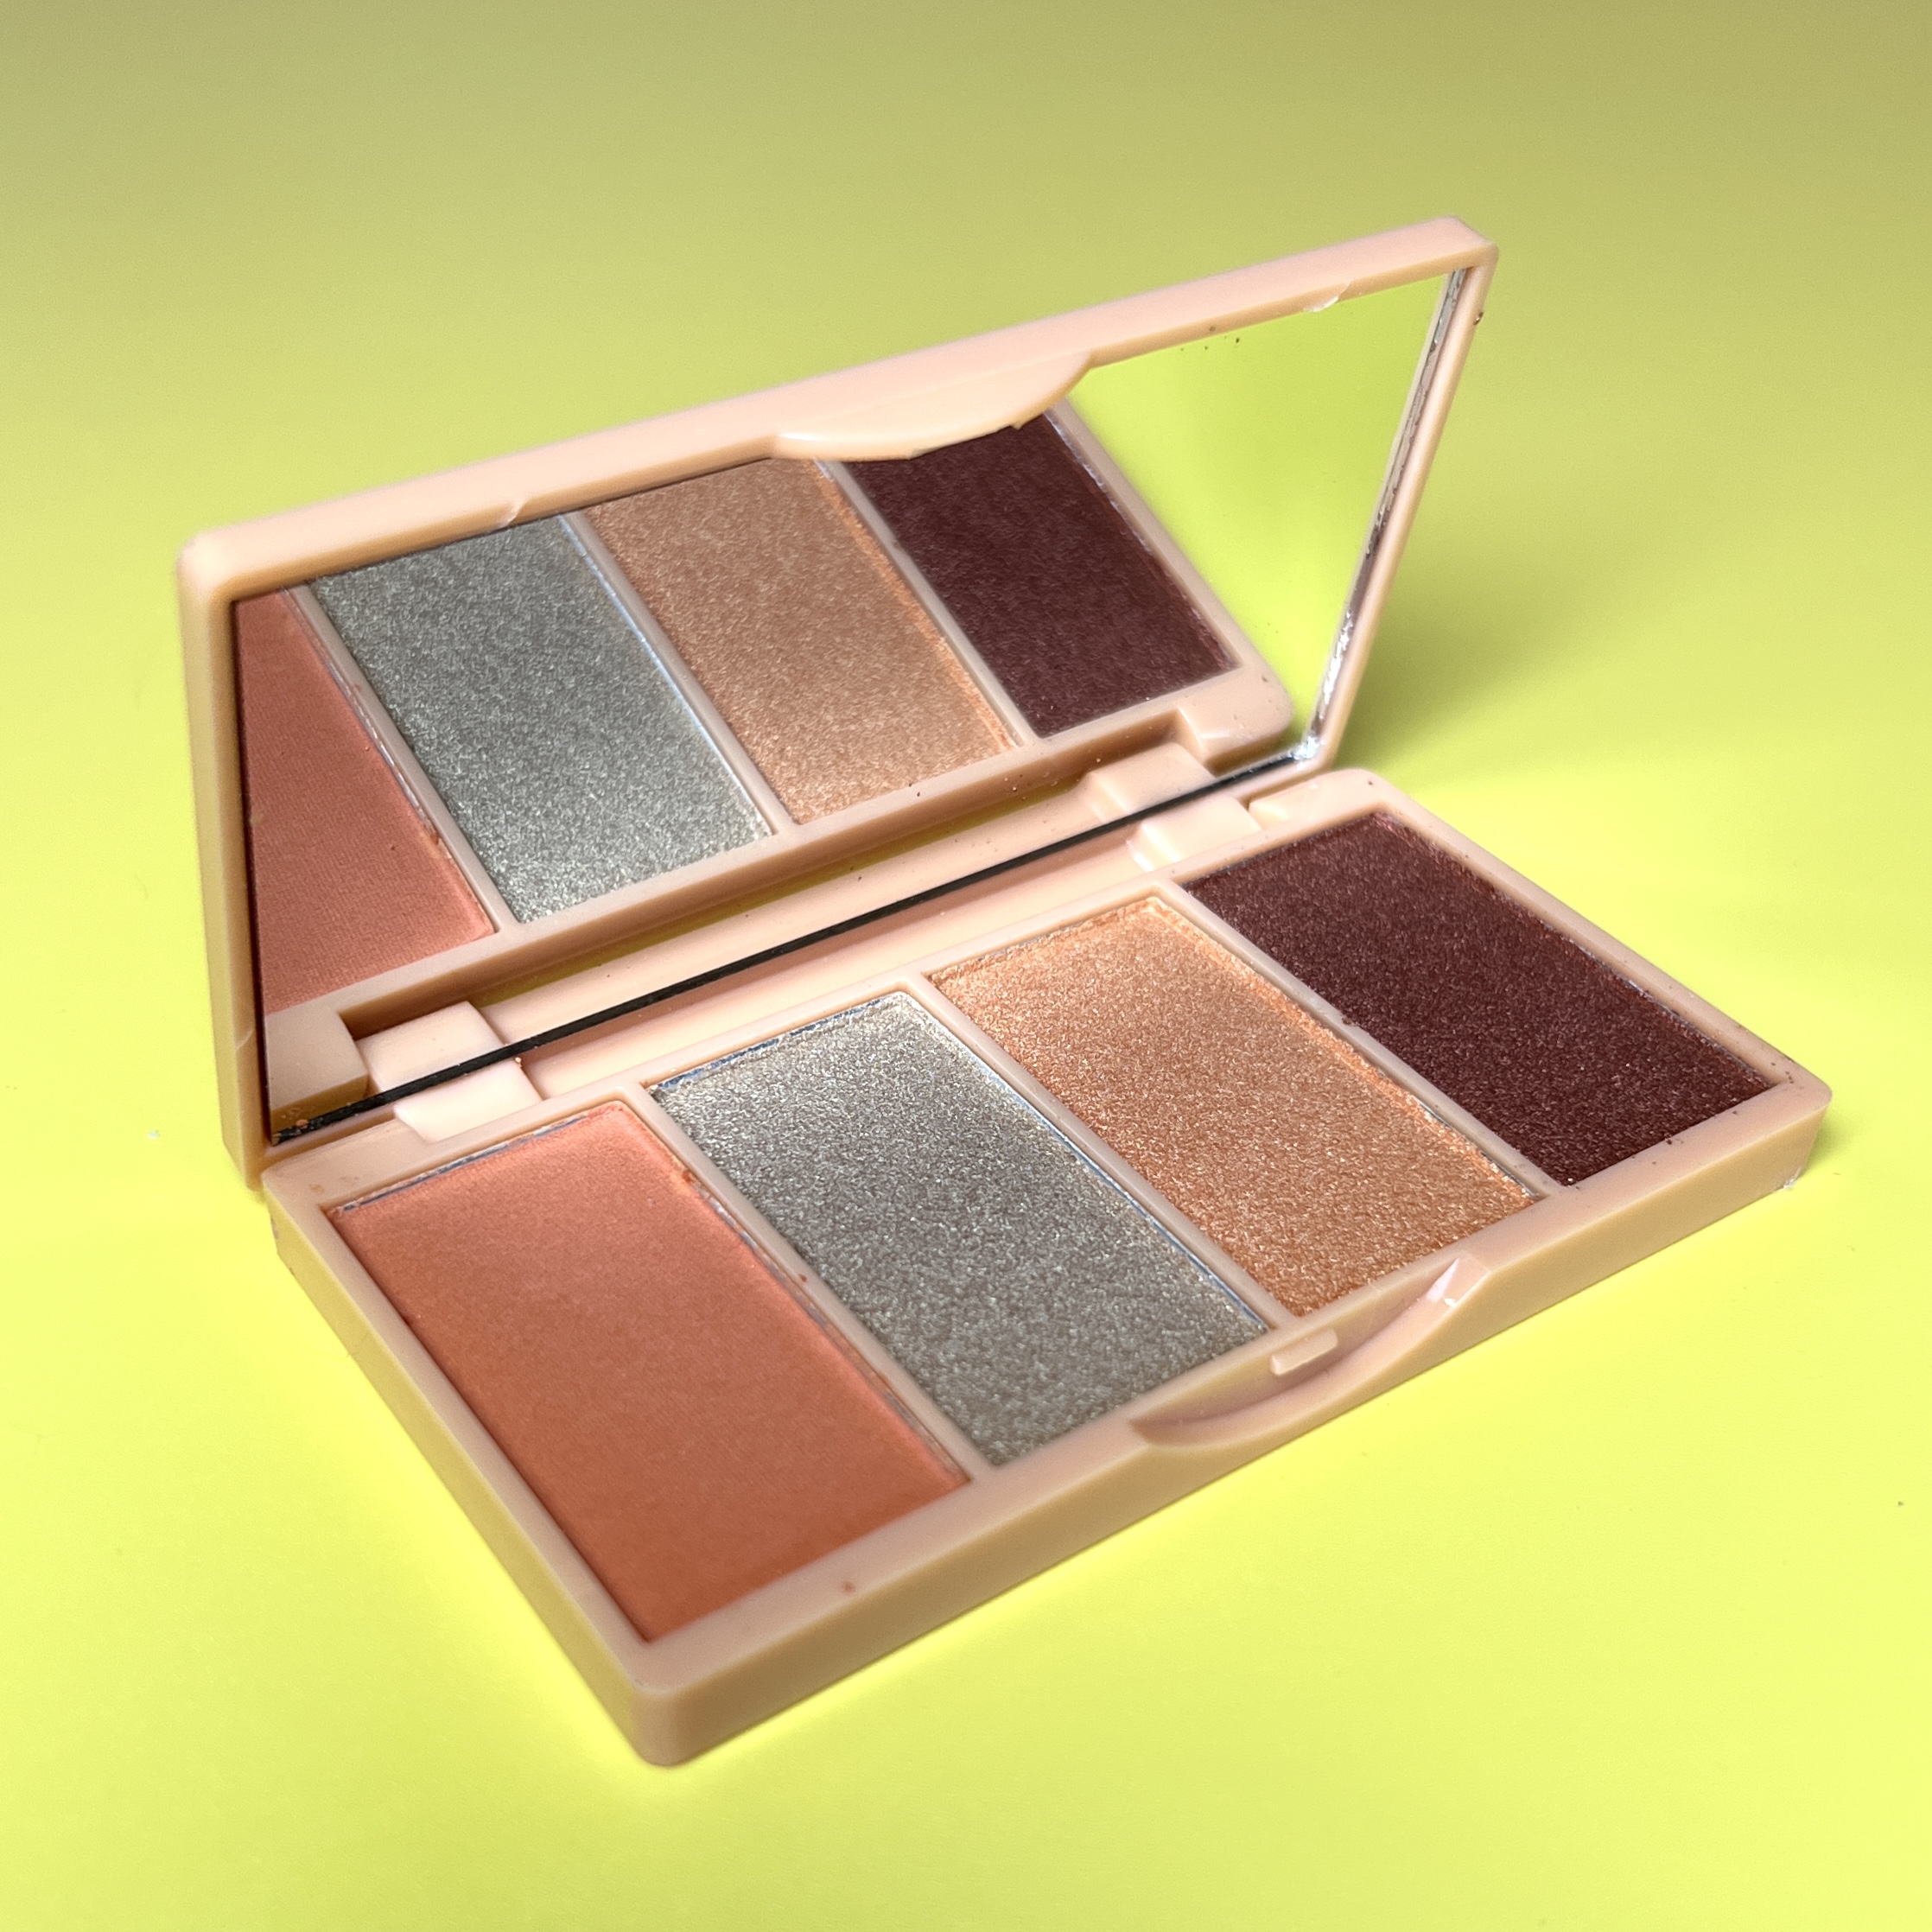 Open Shot of Bellapierre Cosmetics Eyeshadow Palette for GlossyBox July 2022